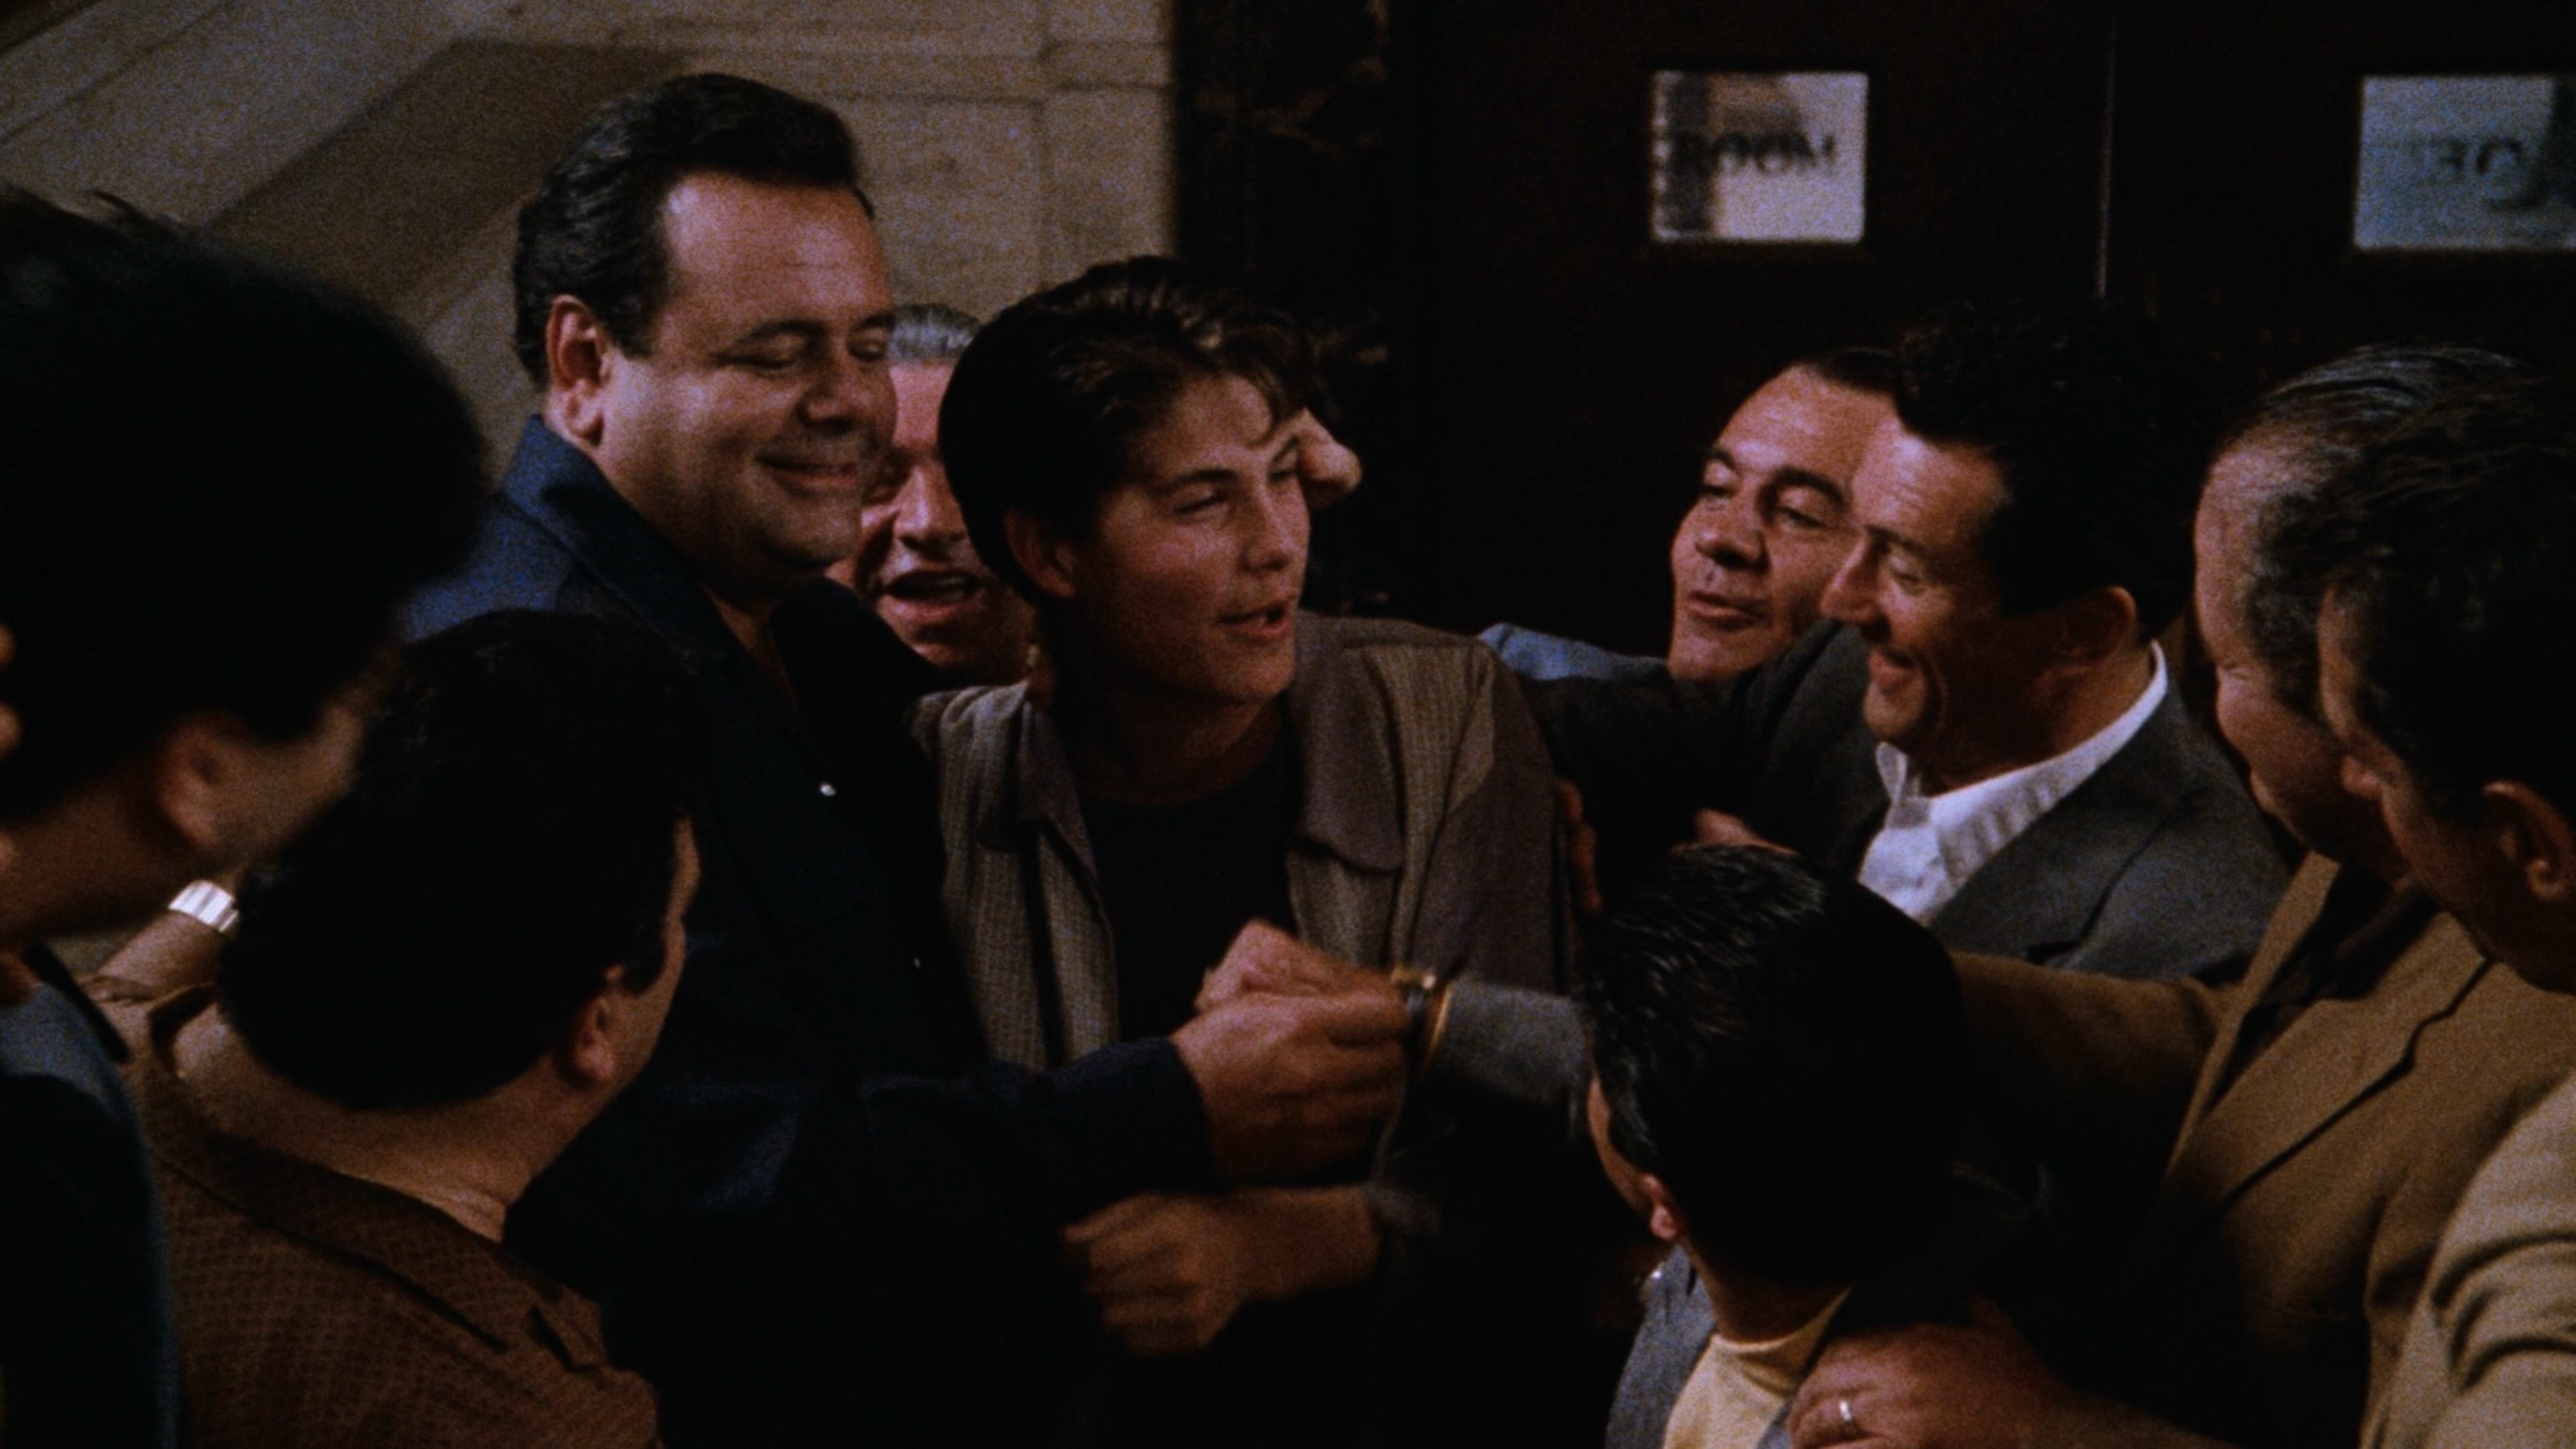 3840x2160 Goodfellas picture Goodfellas picture Goodfellas picture ...